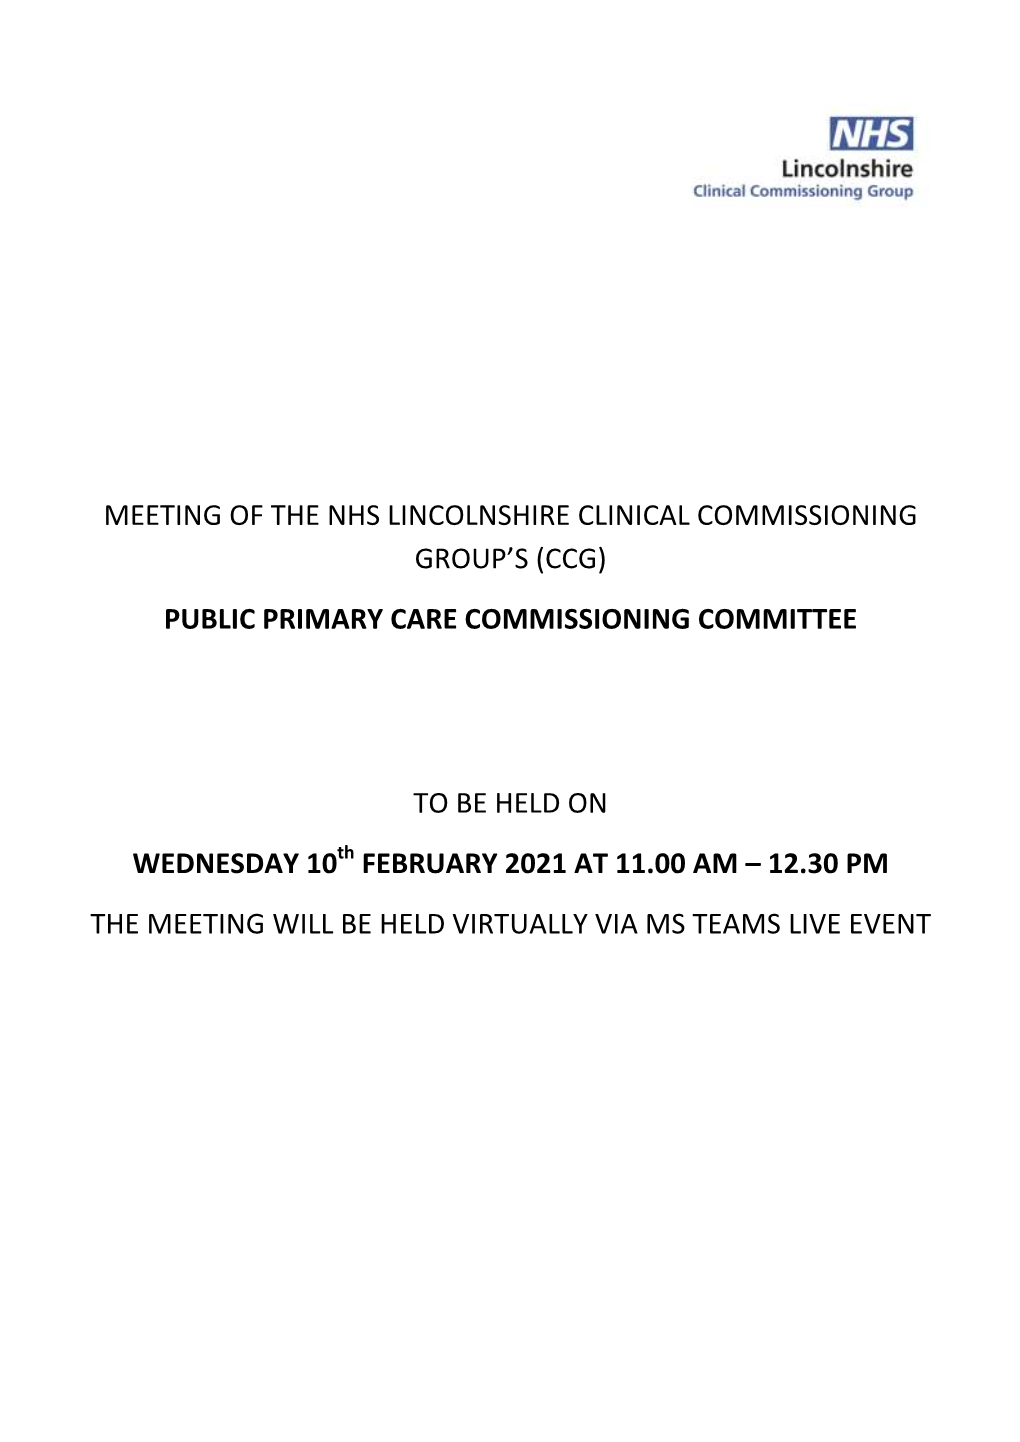 Public Primary Care Commissioning Committee to Be Held On